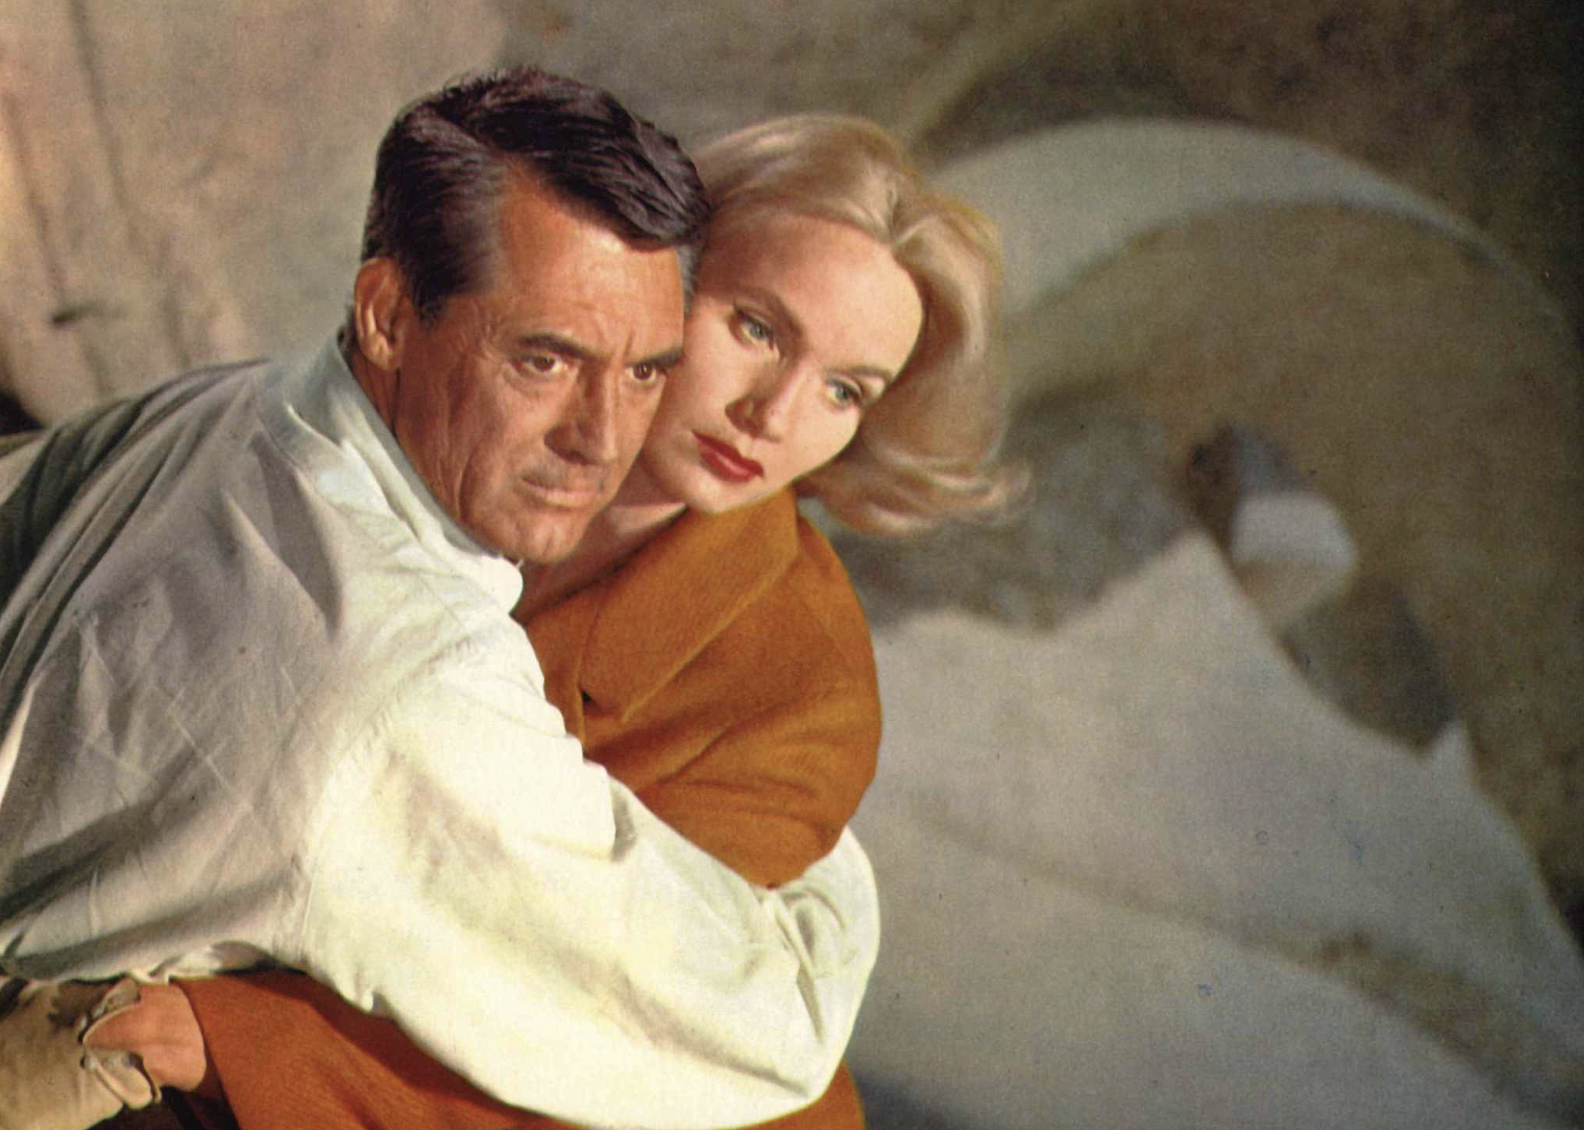 Cary Grant and Eva Marie Saint in "North by Northwest"